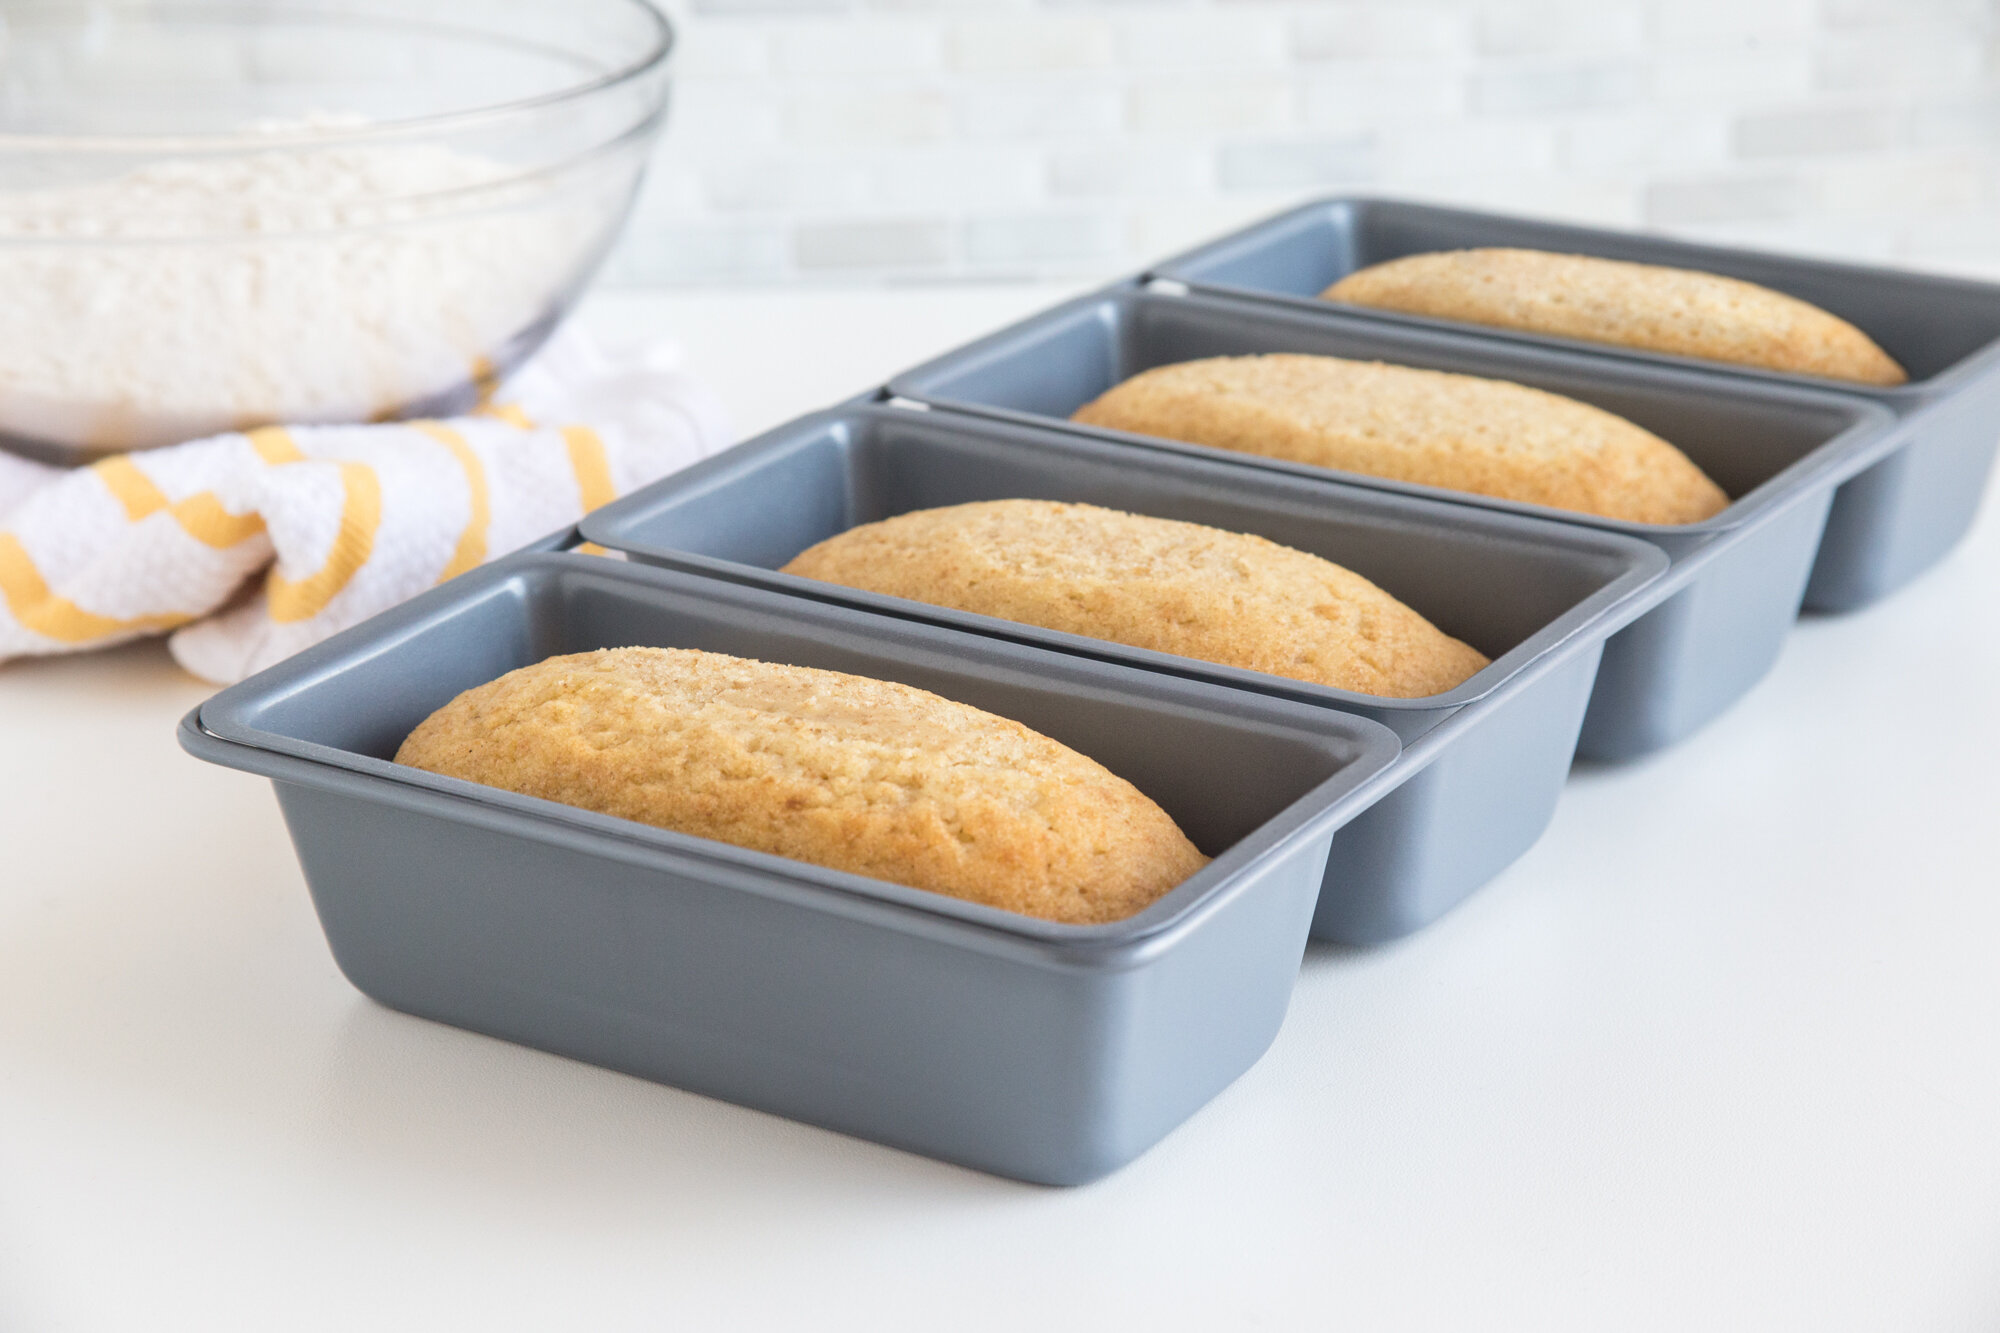 3 x 5.5 Mini Loaf Pan Set 4Pcs - CHEFMADE official store